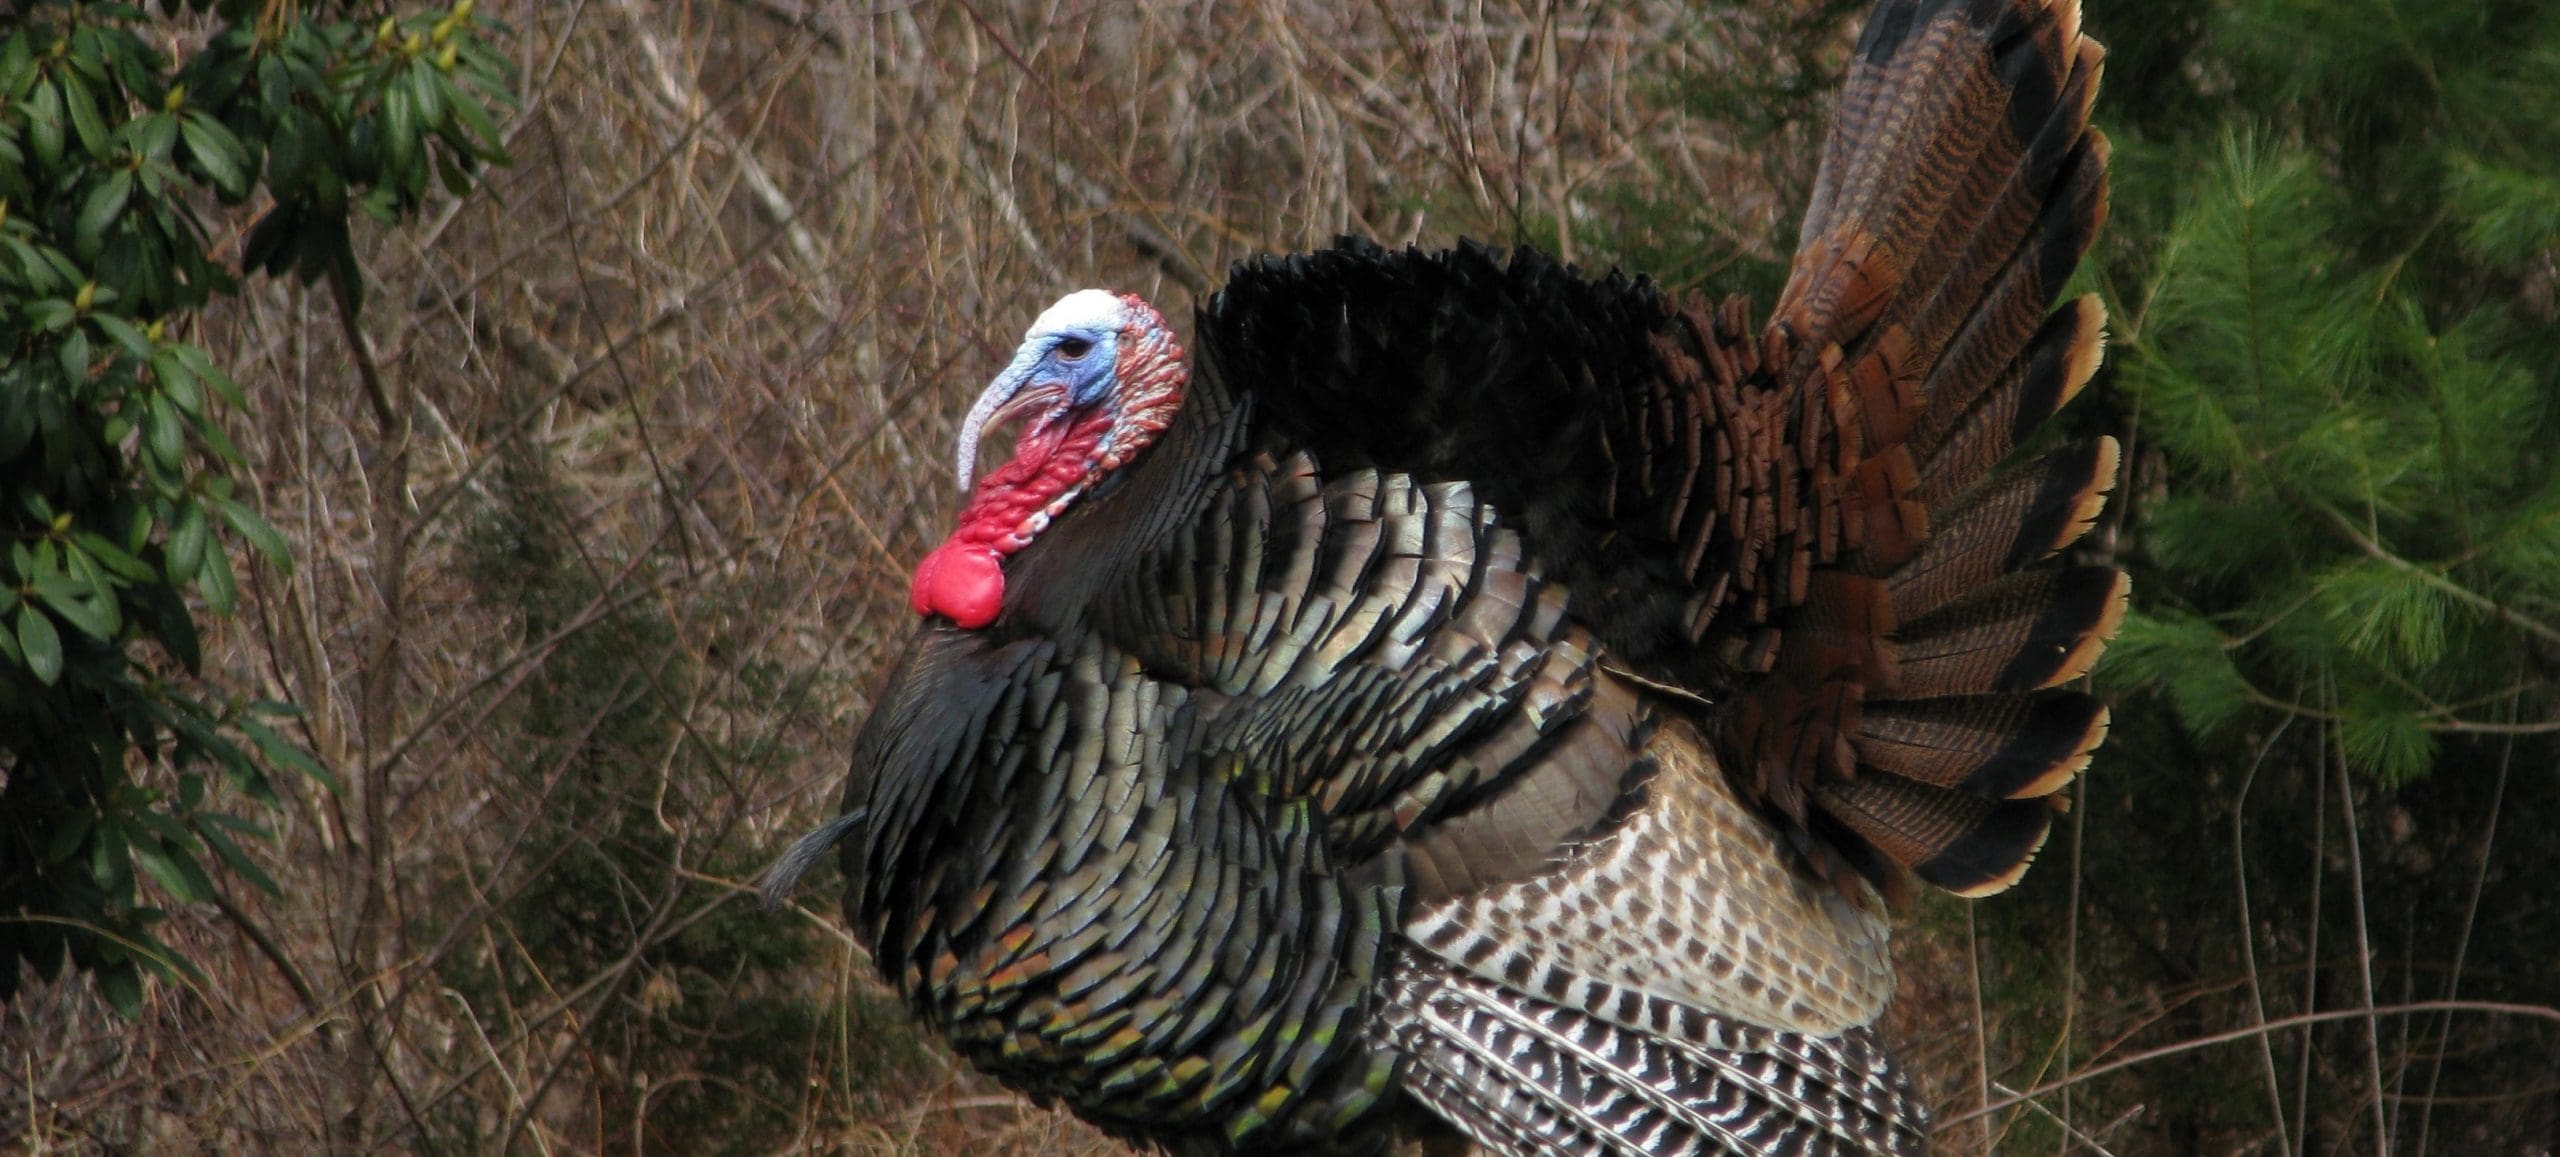 8 Fascinating Facts About Turkeys